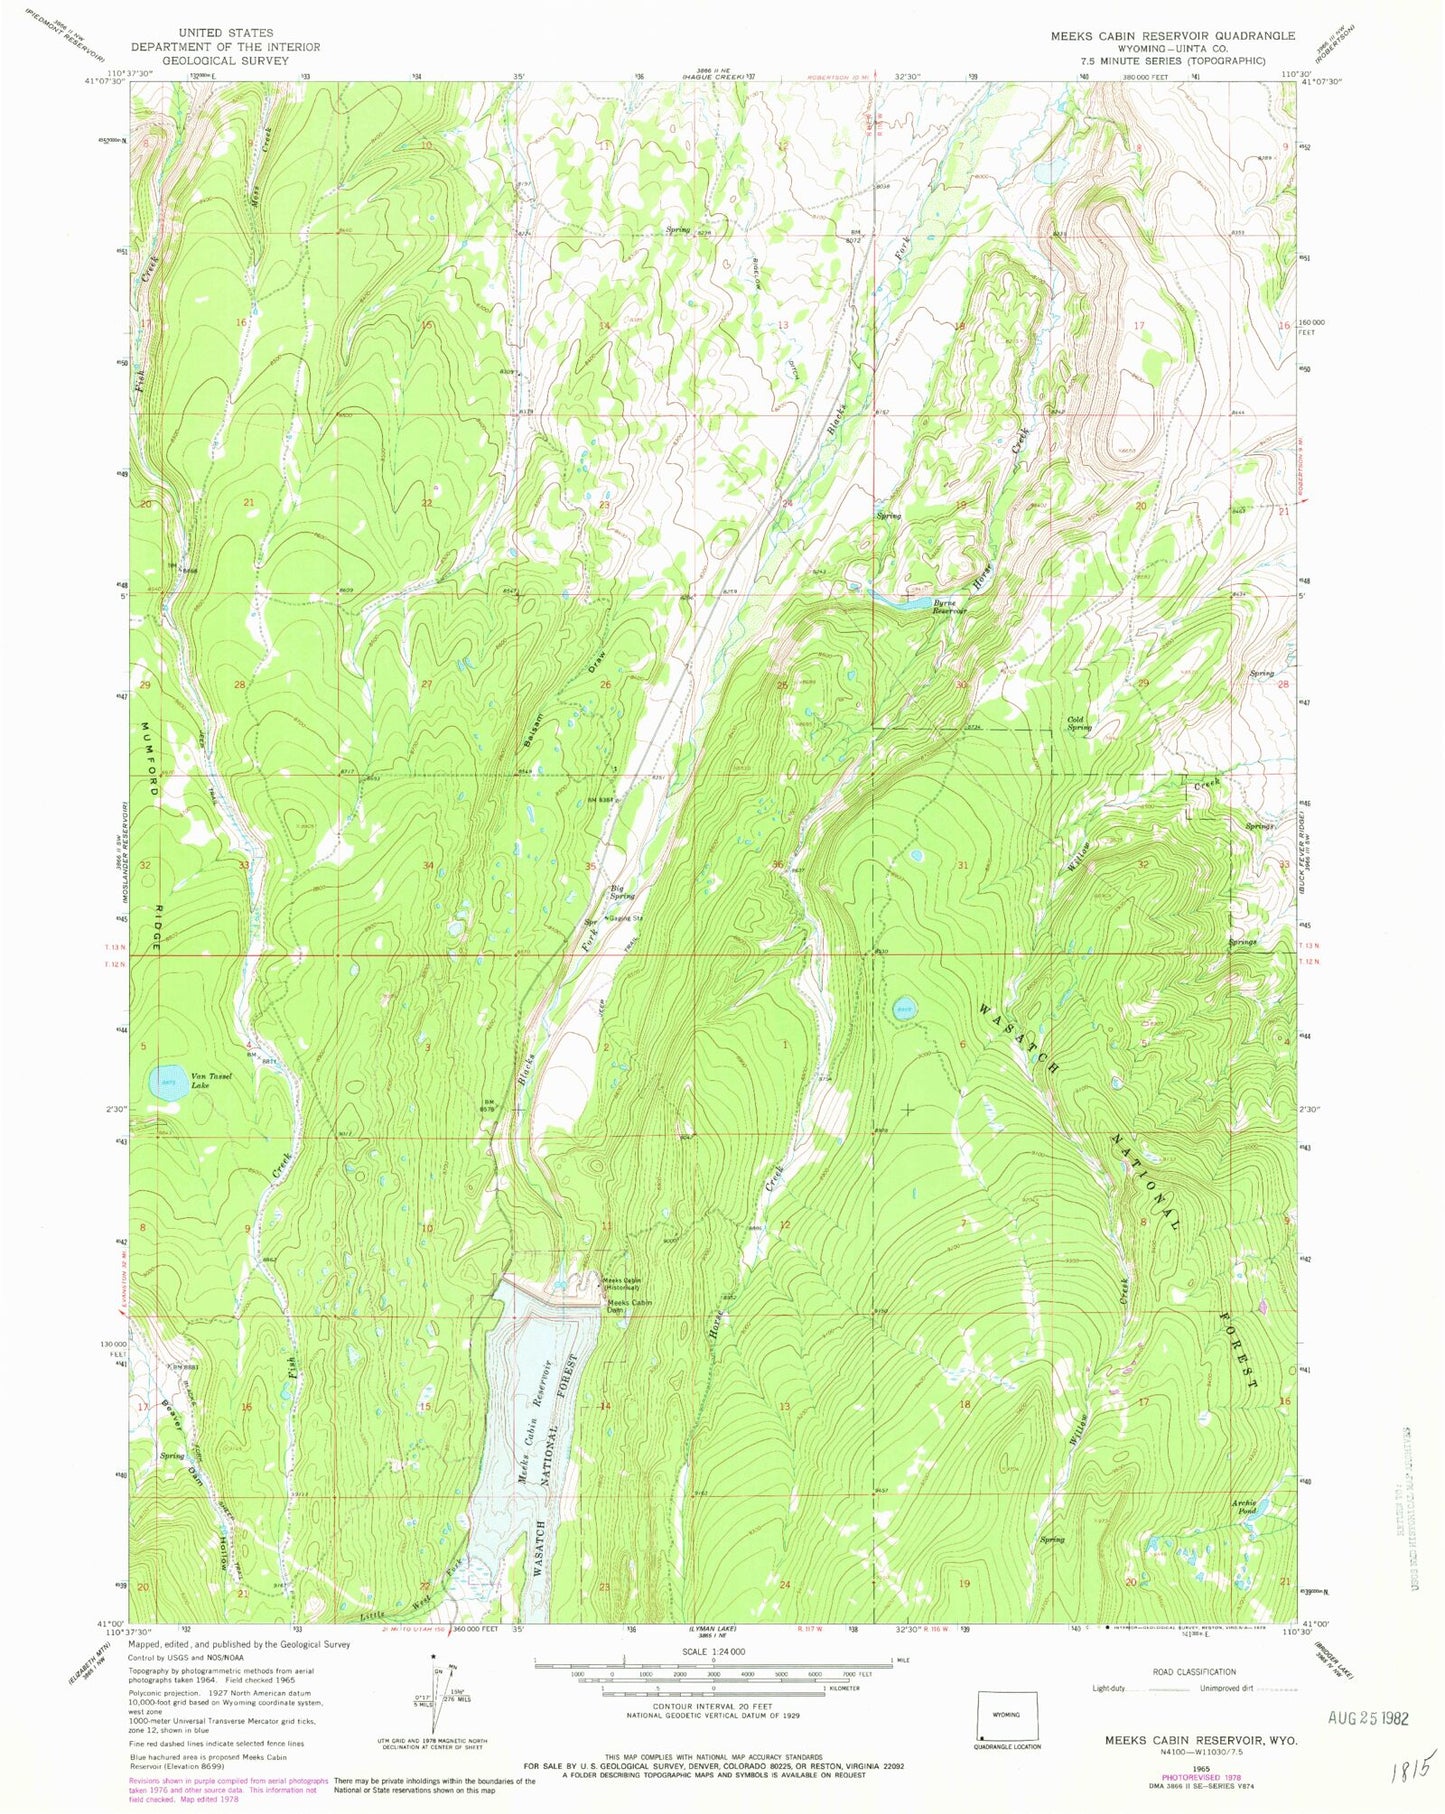 Classic USGS Meeks Cabin Reservoir Wyoming 7.5'x7.5' Topo Map Image